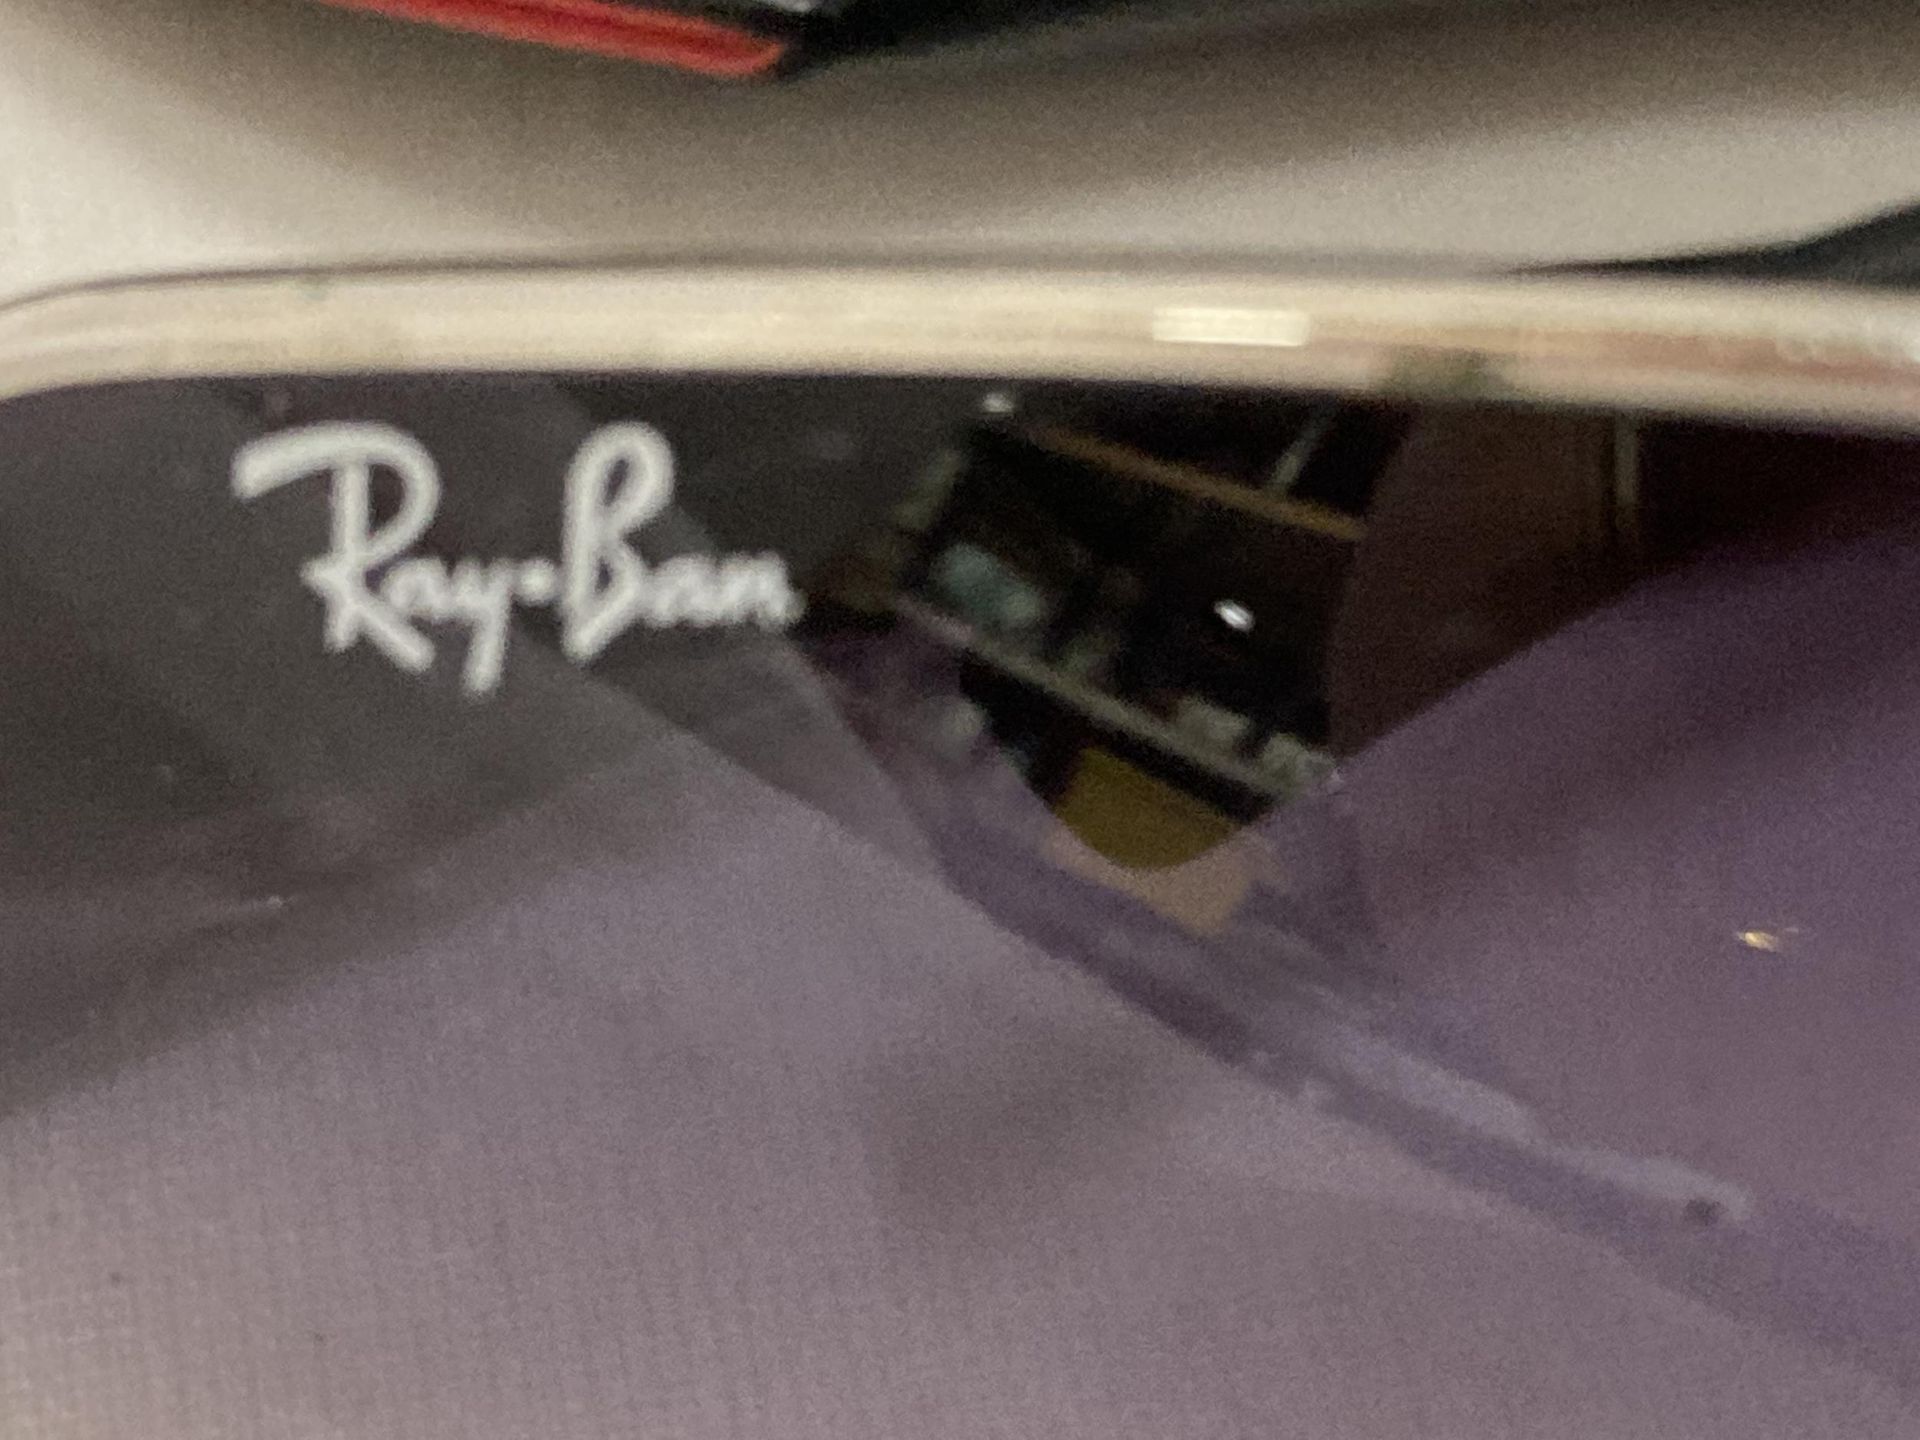 A PAIR OF RAY-BAN SUNGLASSES, CASED - Image 2 of 4